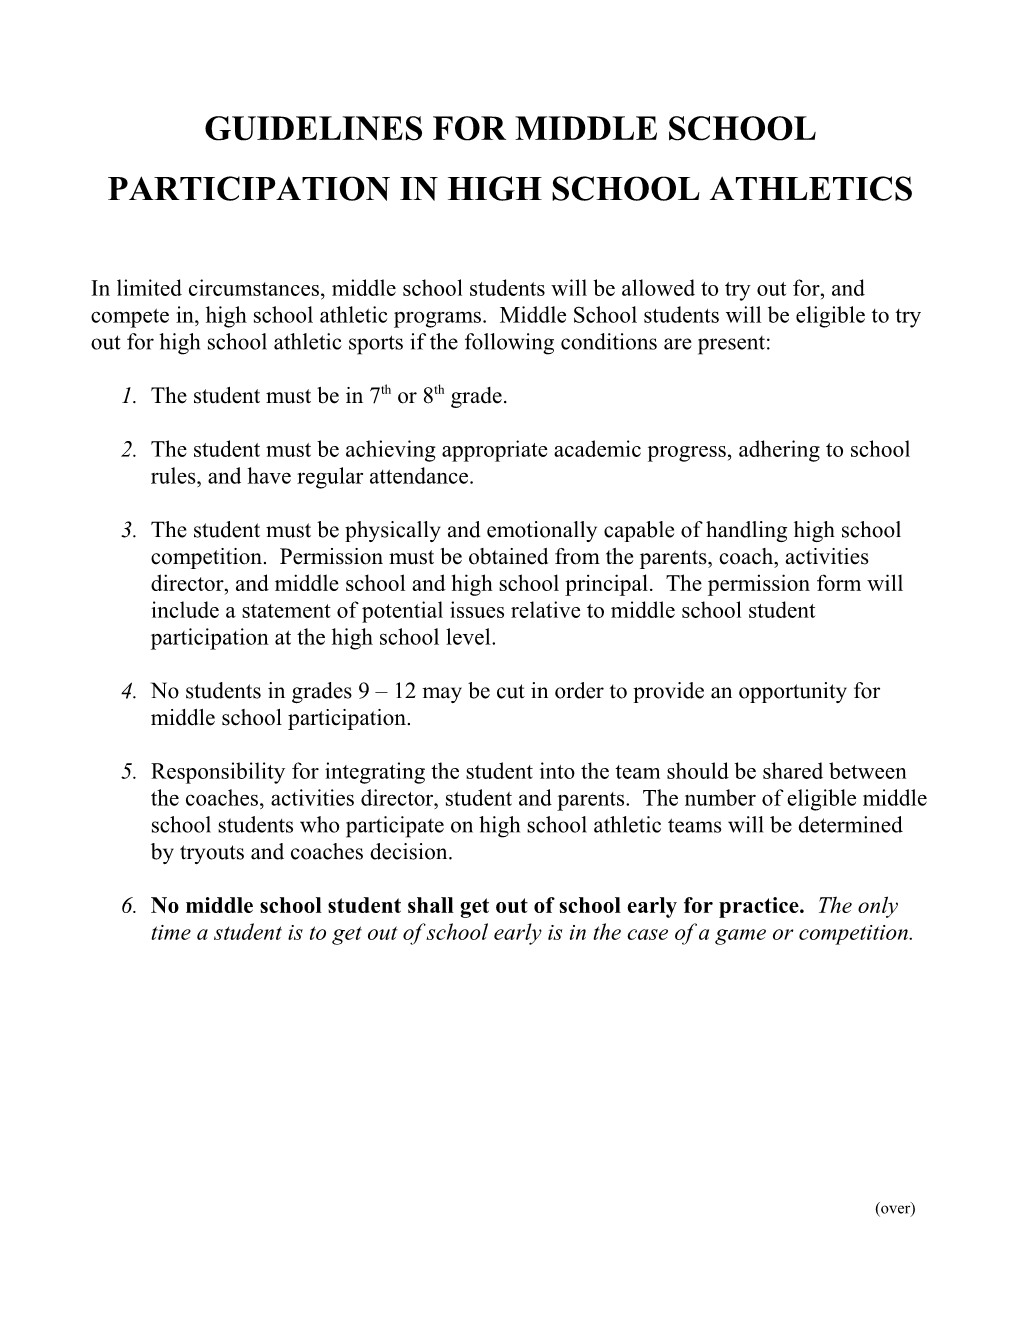 Guidelines for Middle School Participation in High School Athletics